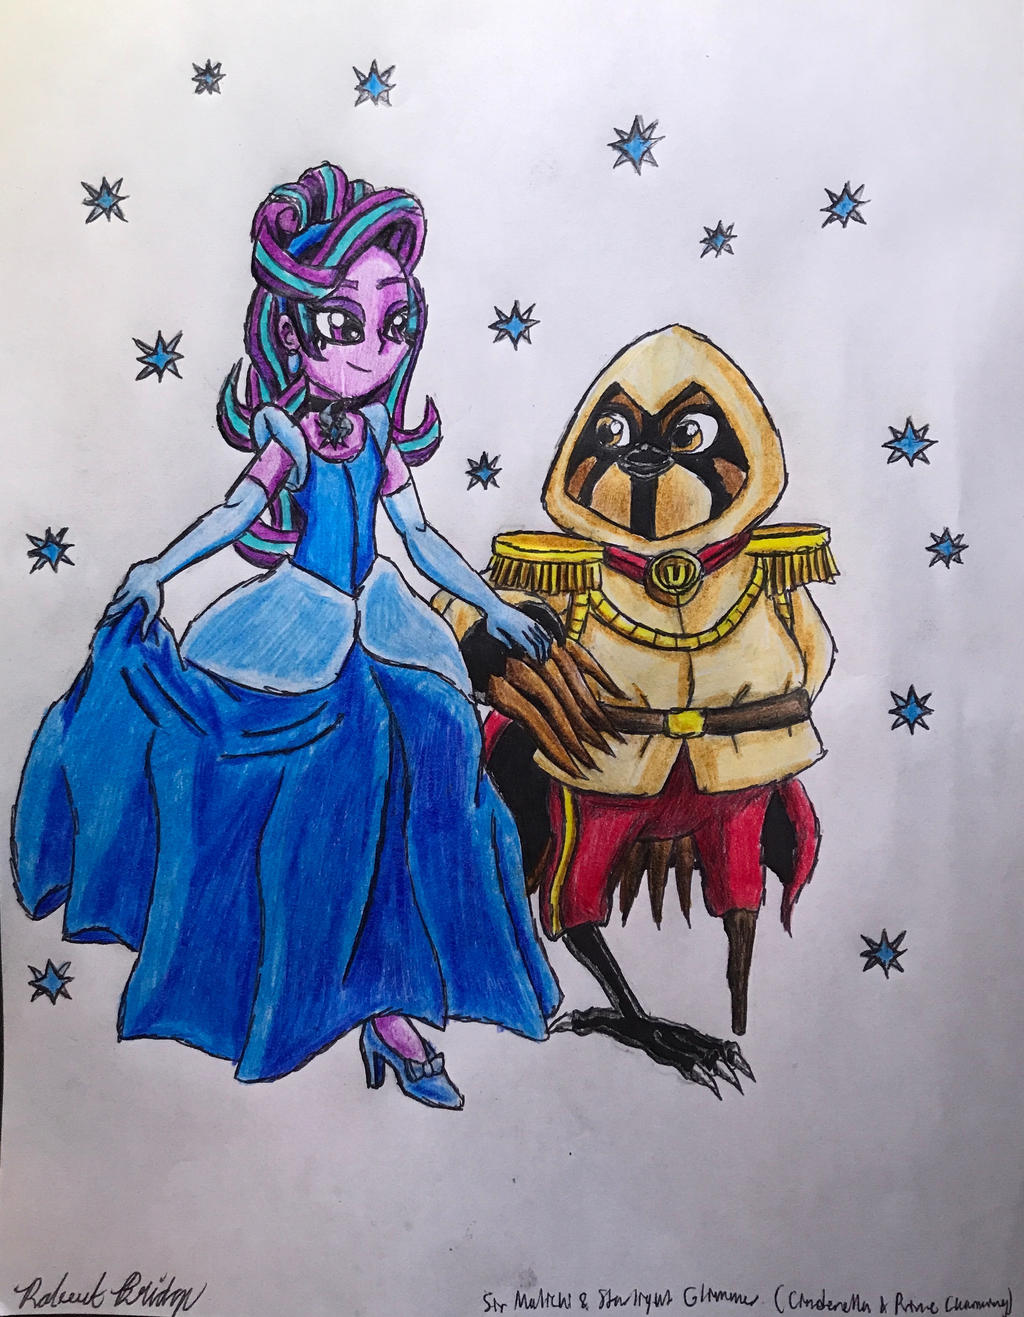 Nightmare and Dream birthday by Galaxybunny11 on DeviantArt